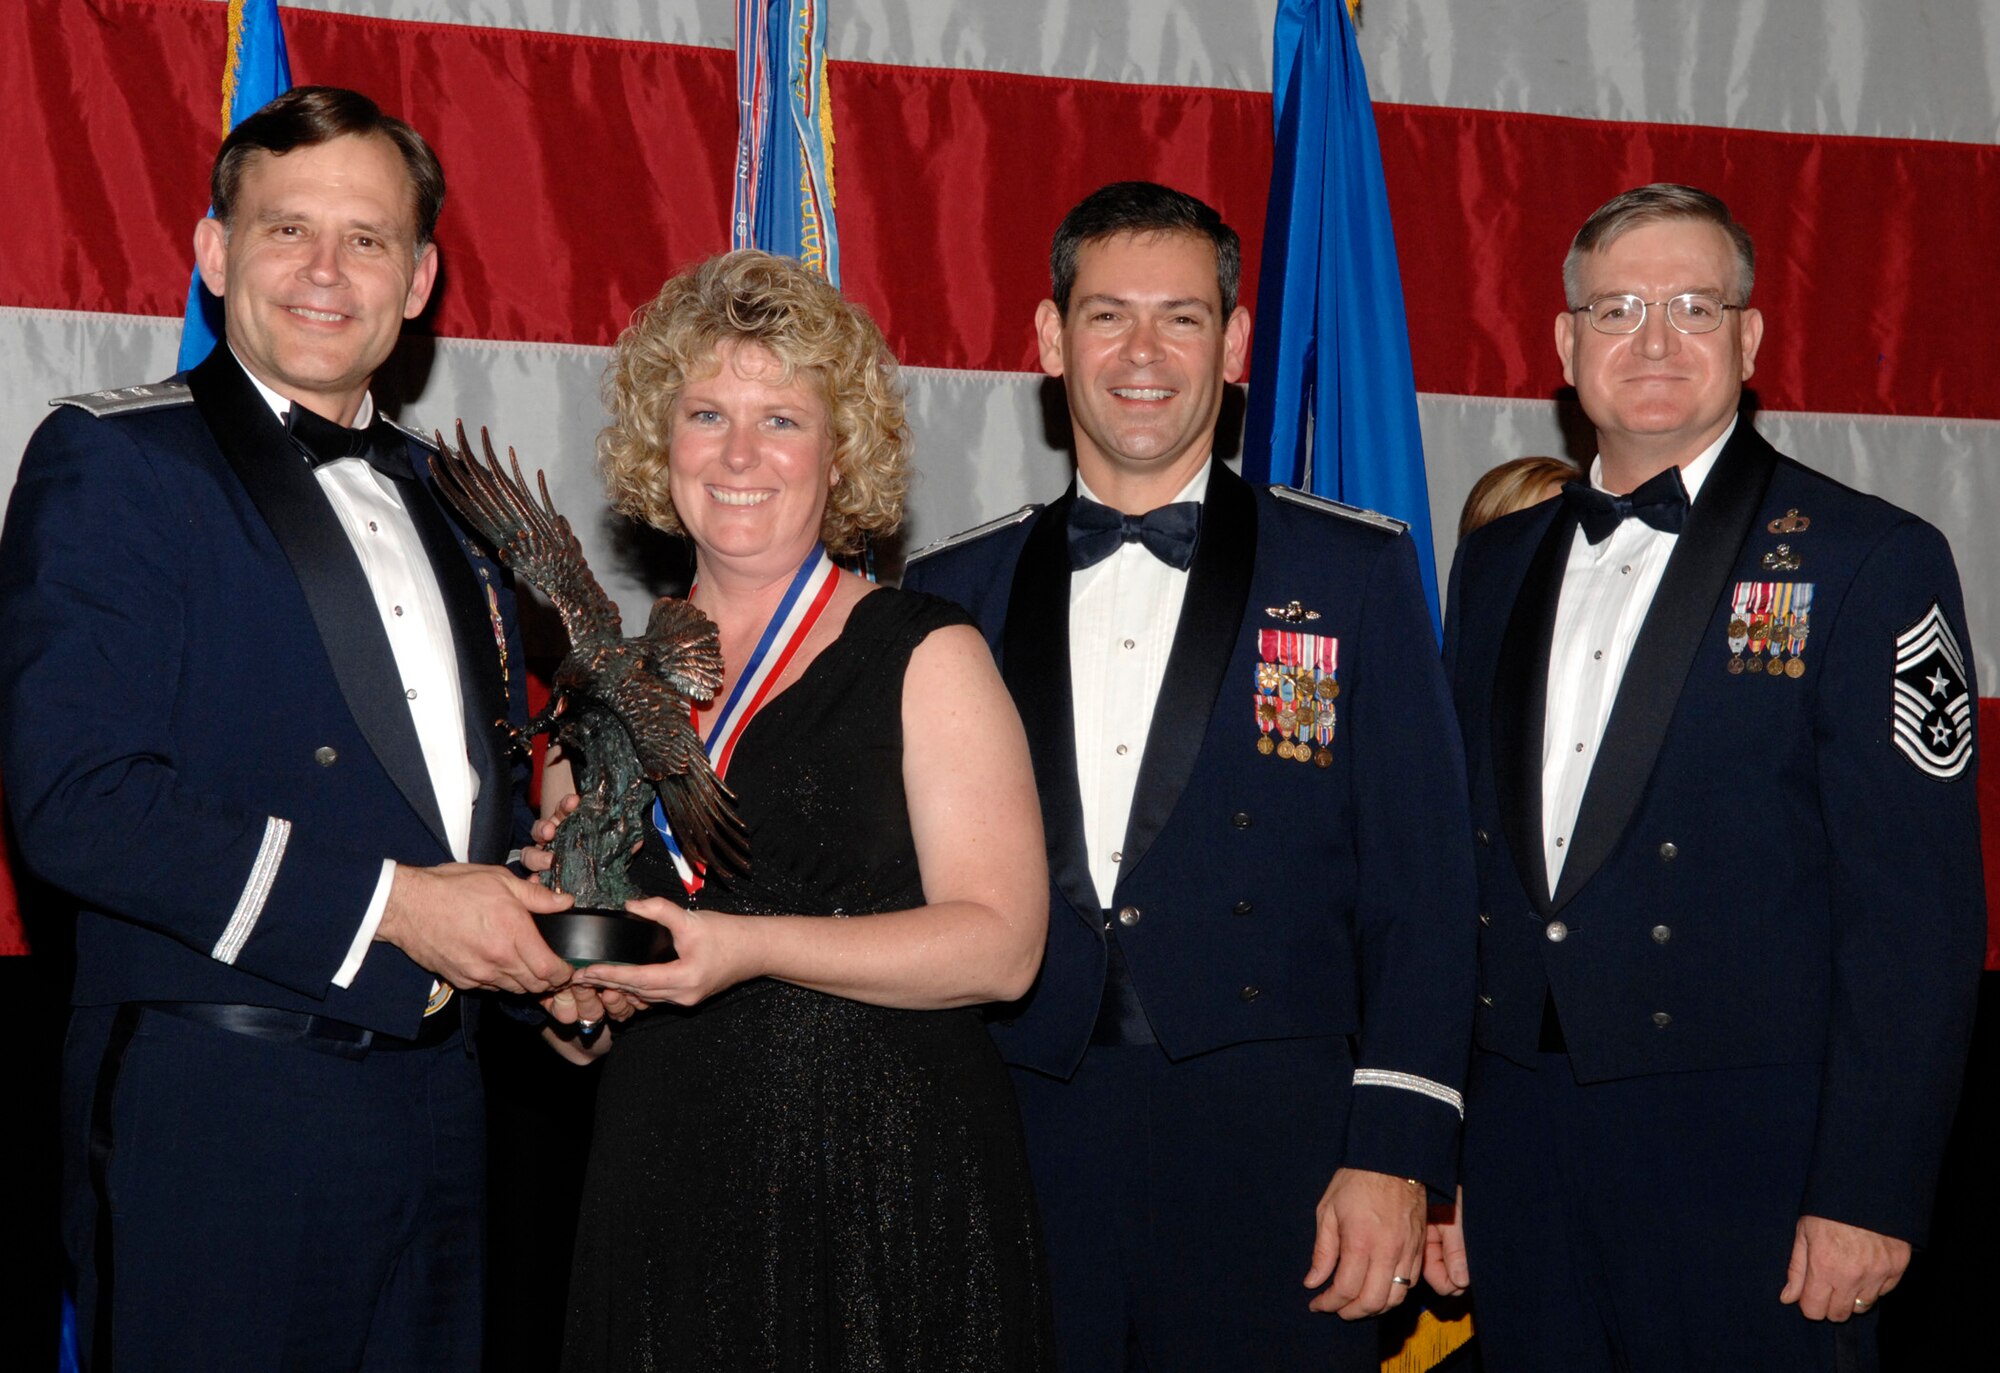 Victoria Fogarty, 82nd Aerial Targets Squadron, won the 53d Wing Category 2 Civilian of the Year Award during the annual awards banquet Jan. 31 at the Emerald Coast Conference Center.  The night’s guest speaker and former 53d commander, Maj. Gen. (retired) Jack Catton (left) presented the awards. Col. Ken Wilsbach, 53d Wing commander, and Chief Master Sgt. Randy Salefske, 53d Wing command chief, also stand with the winner.  U.S. Air Force photo.